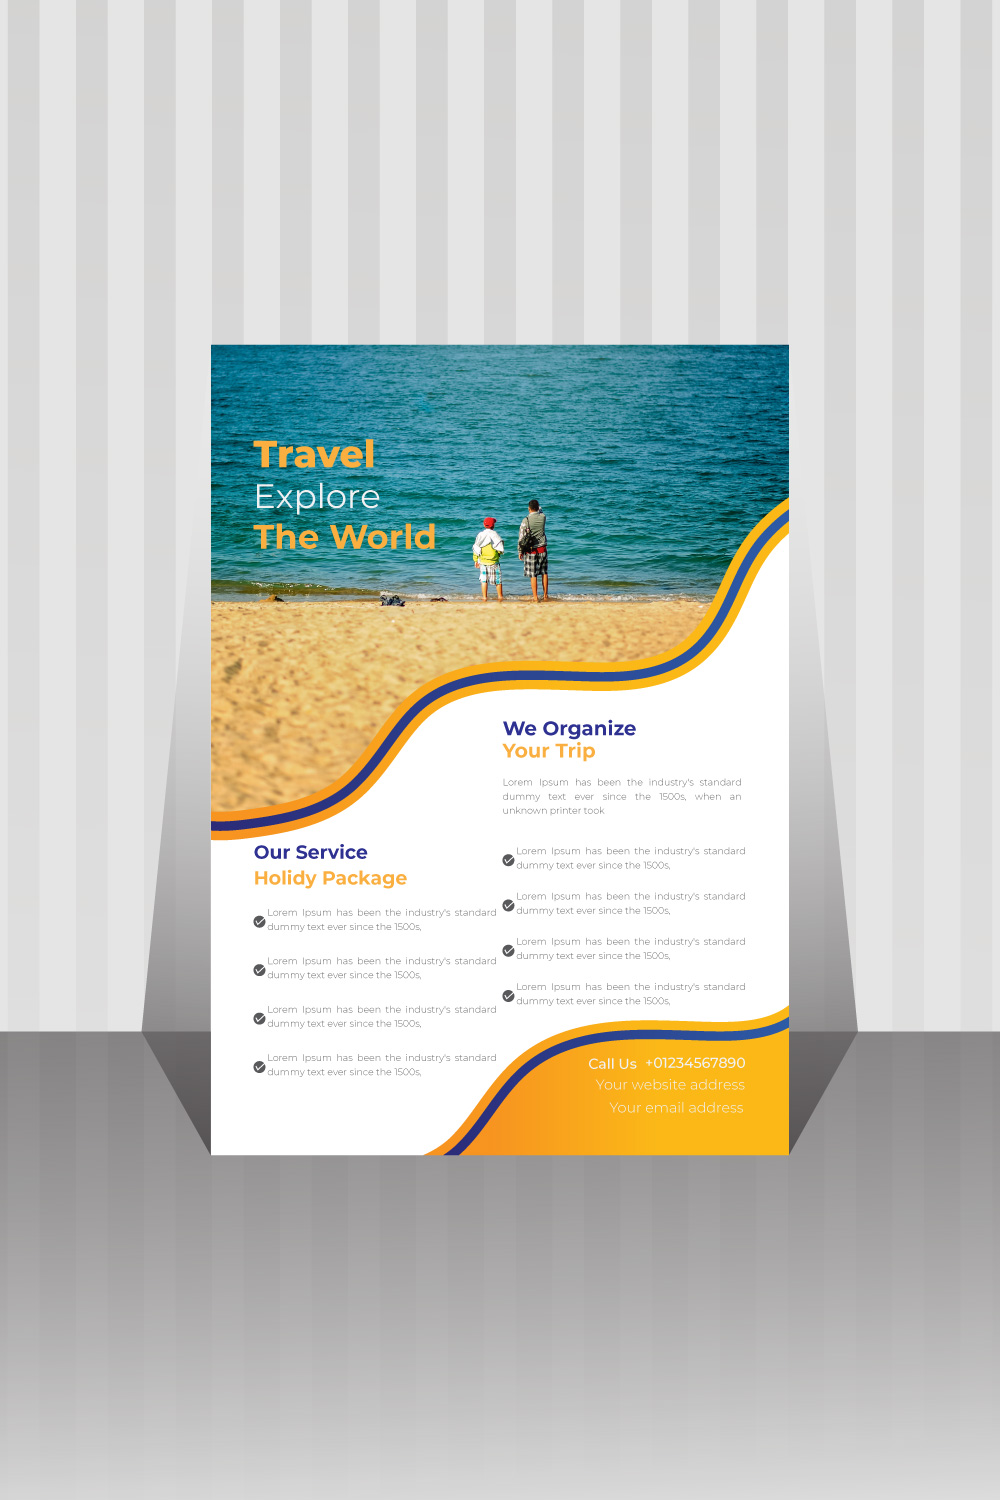 Image of travel agency flyer with beautiful design